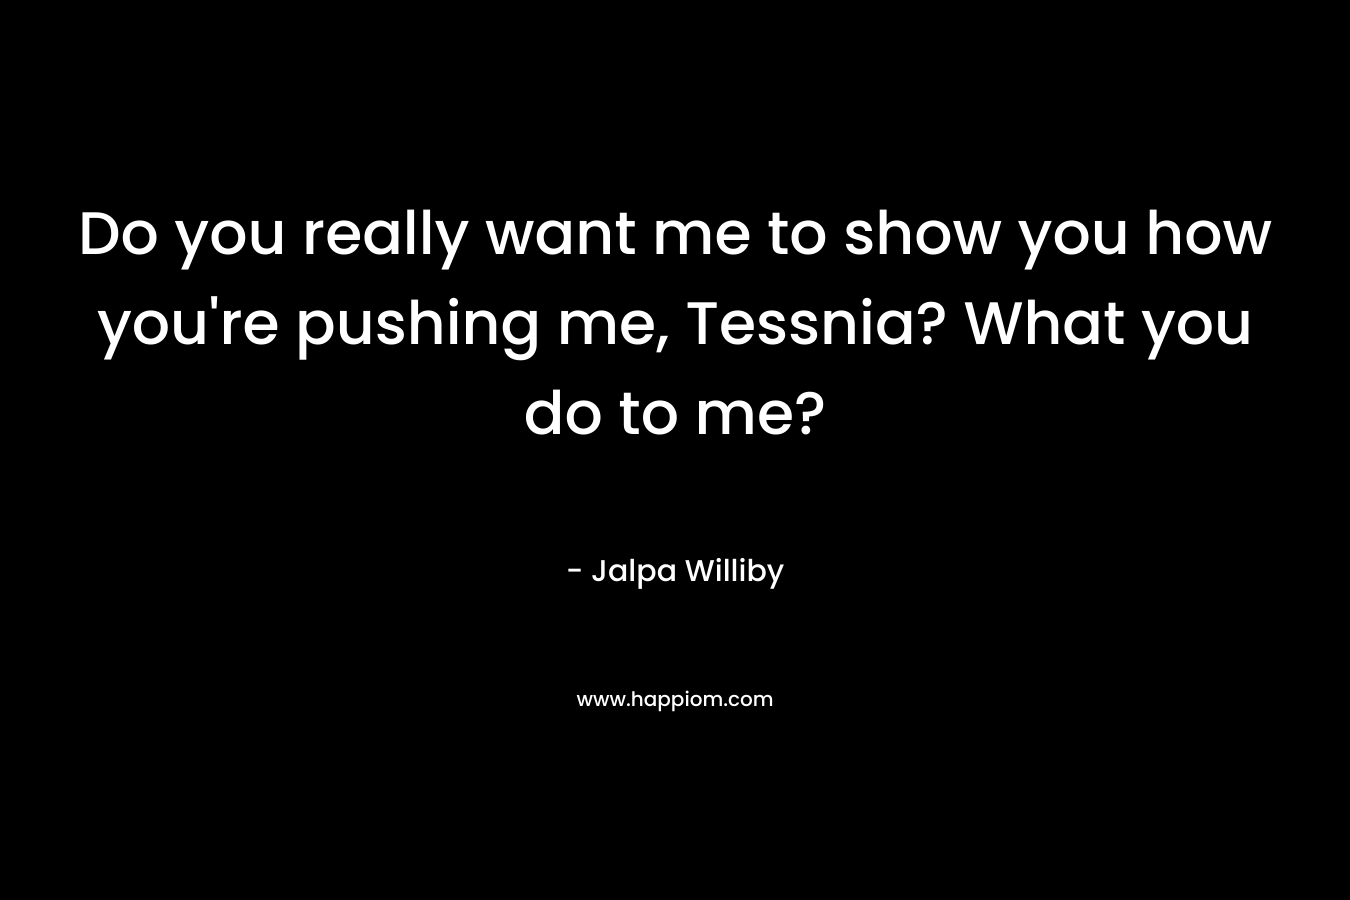 Do you really want me to show you how you're pushing me, Tessnia? What you do to me?